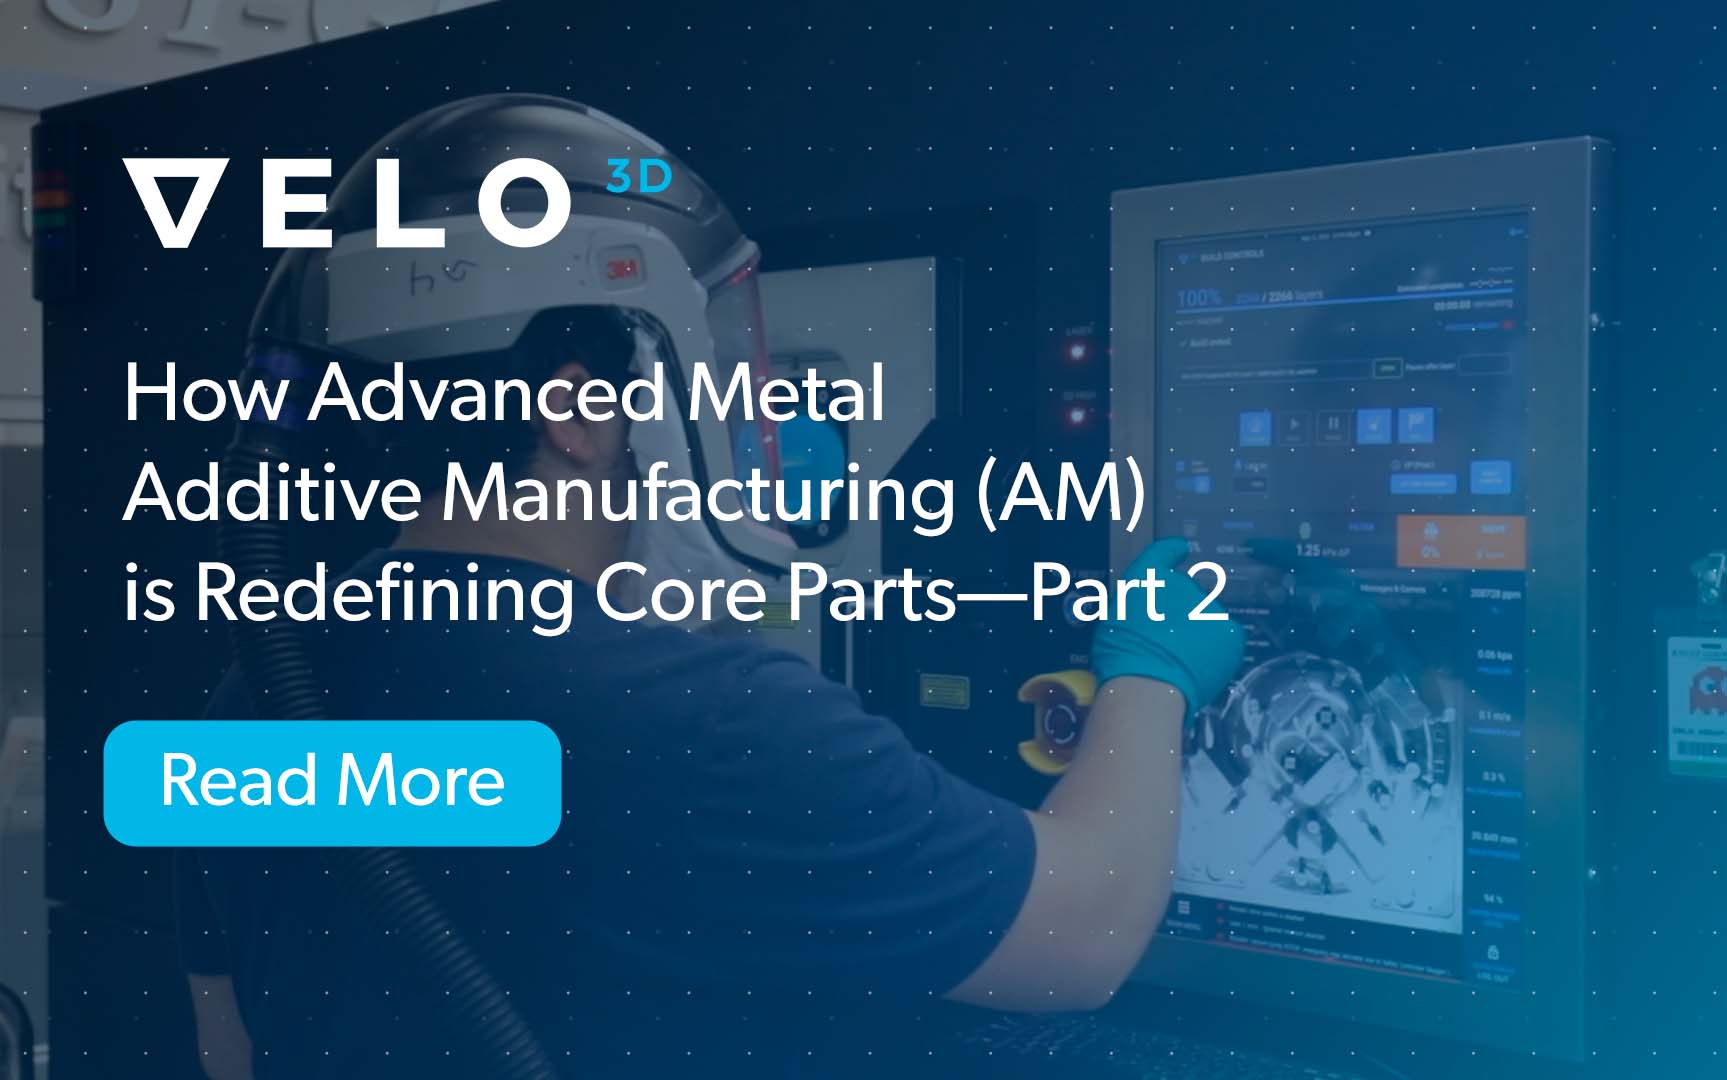 How Advanced Metal Additive Manufacturing (AM) is Redefining Core Parts—Part 2